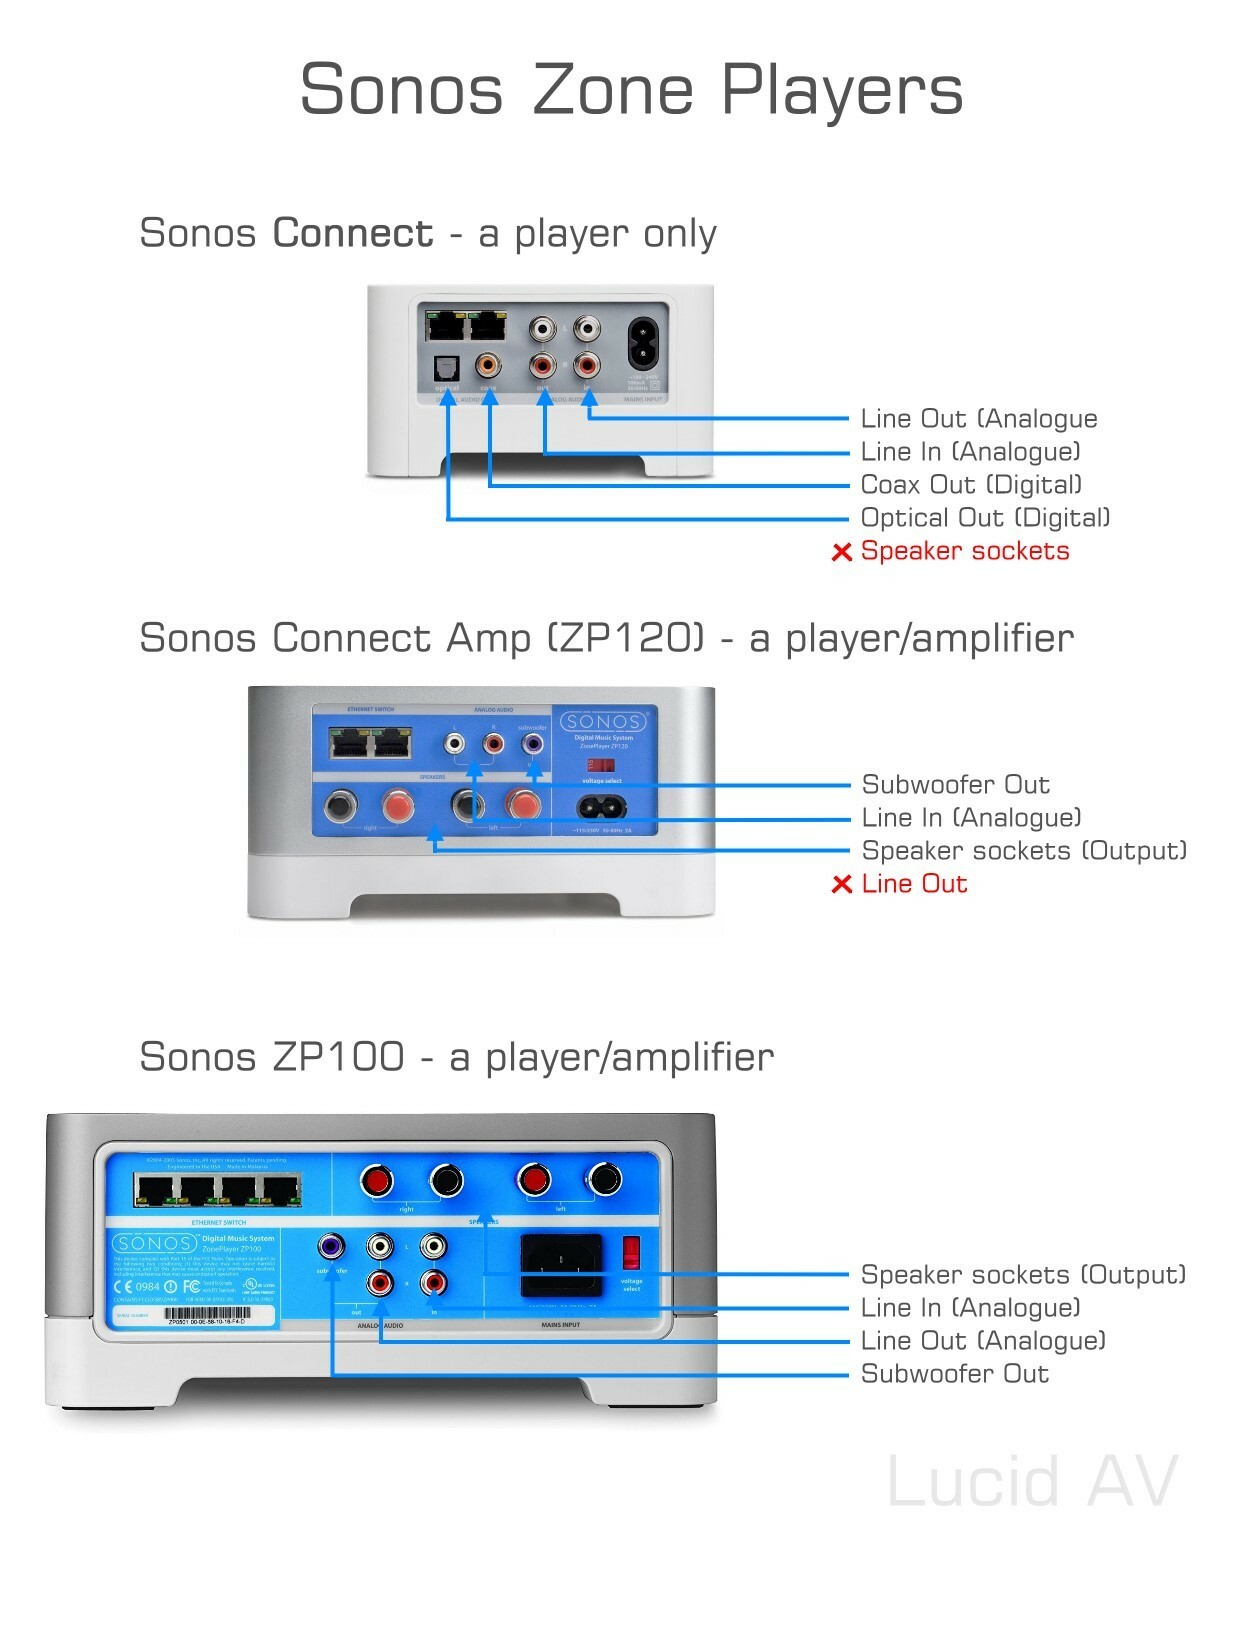 resetting sonos connect amp